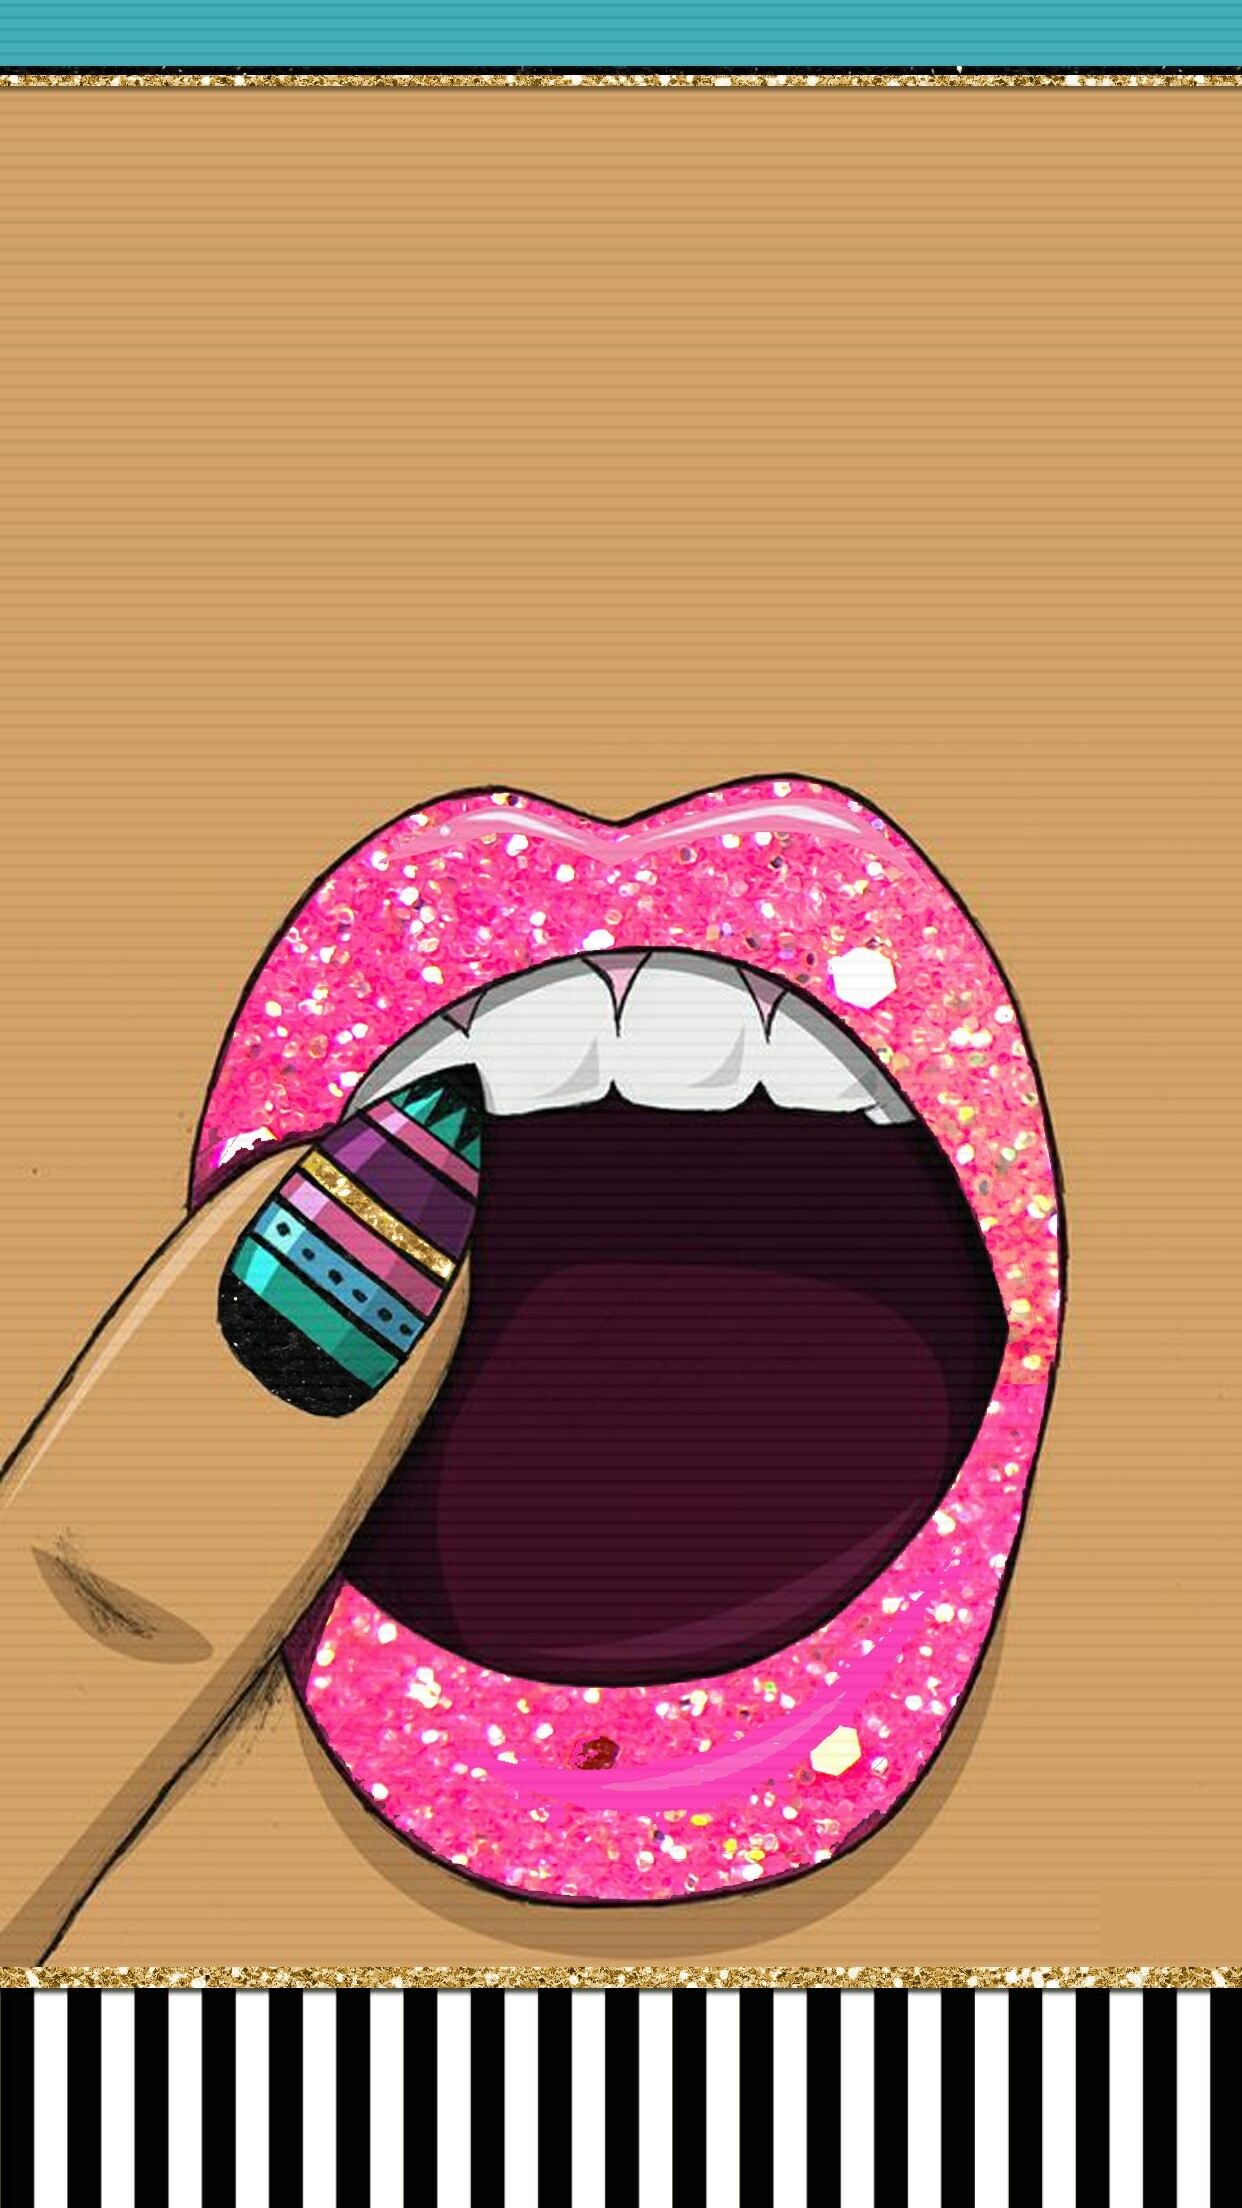 Dope Wallpapers, Iphone 3, Iphone Wallpaper, Hot Lips, Kisses, Hello Kitty, Android, Glitter, Walls